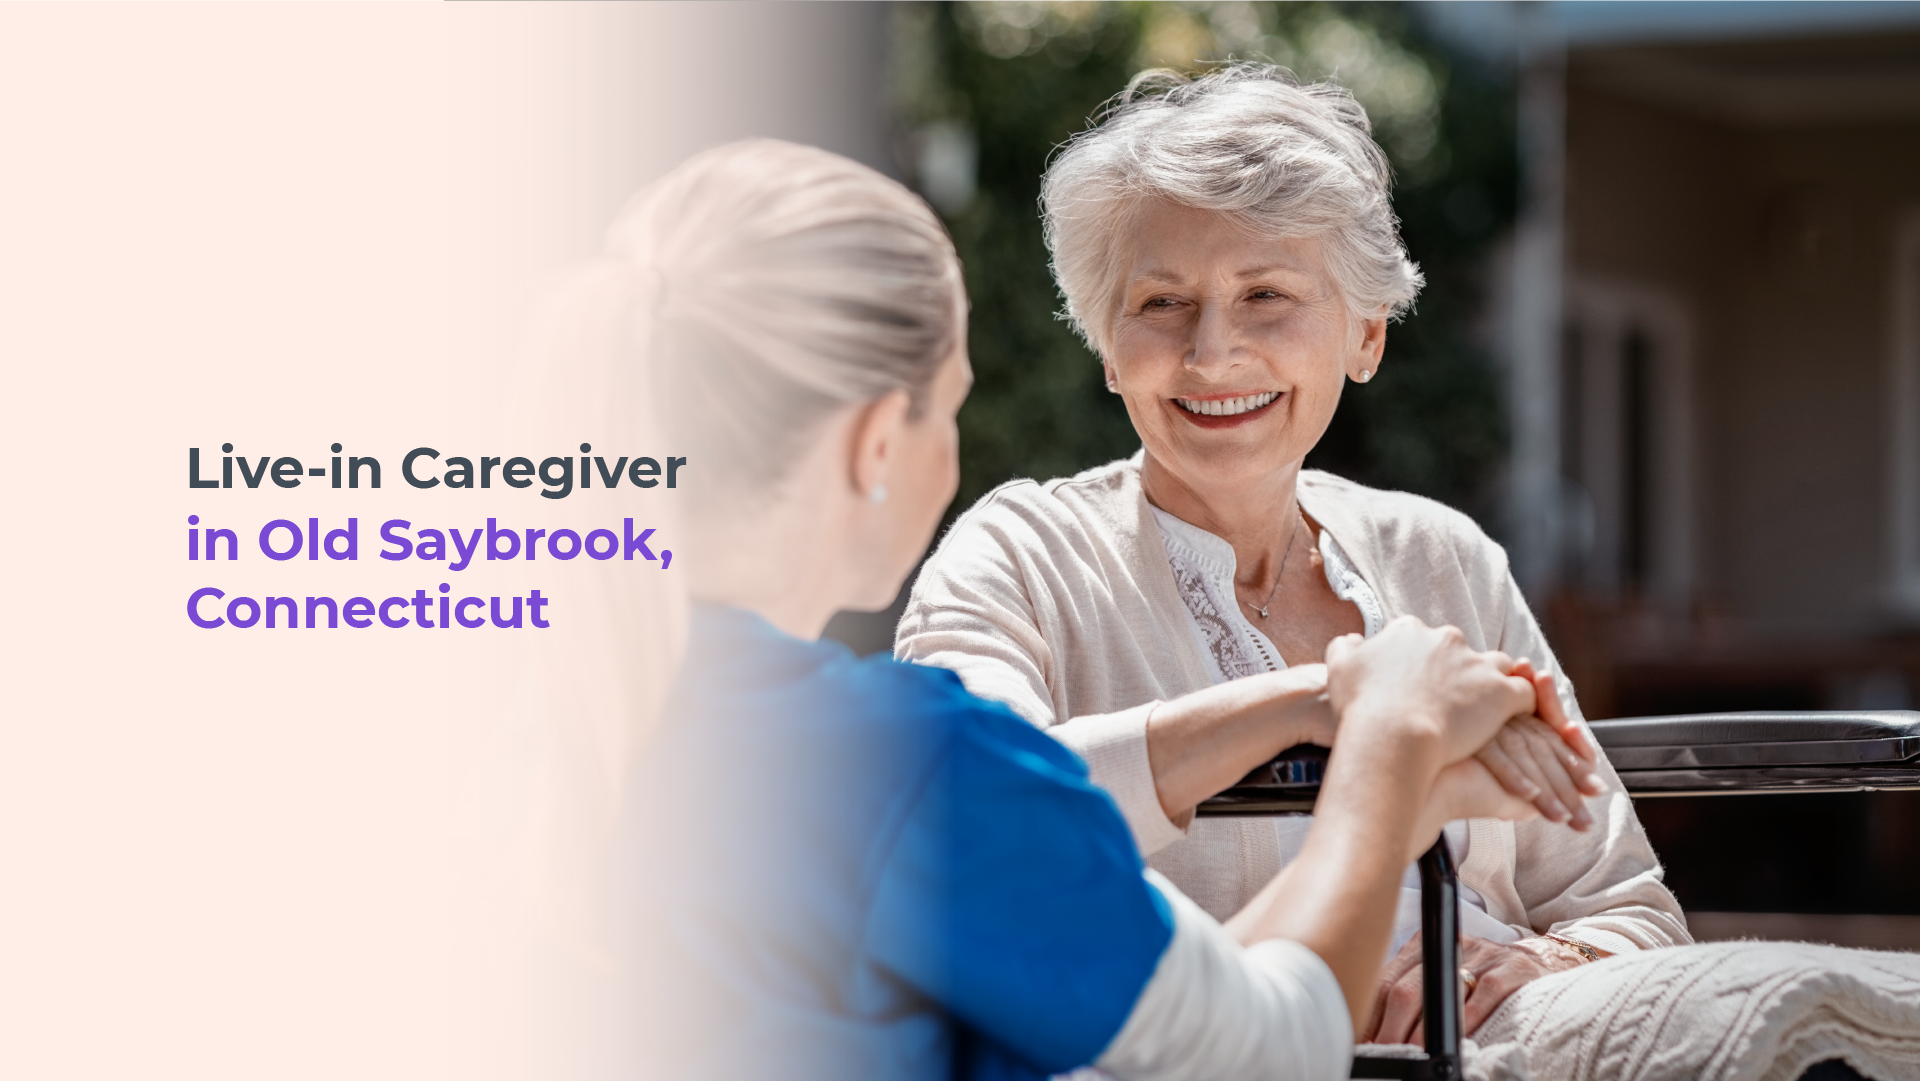 Live-in Caregivers in Old Saybrook